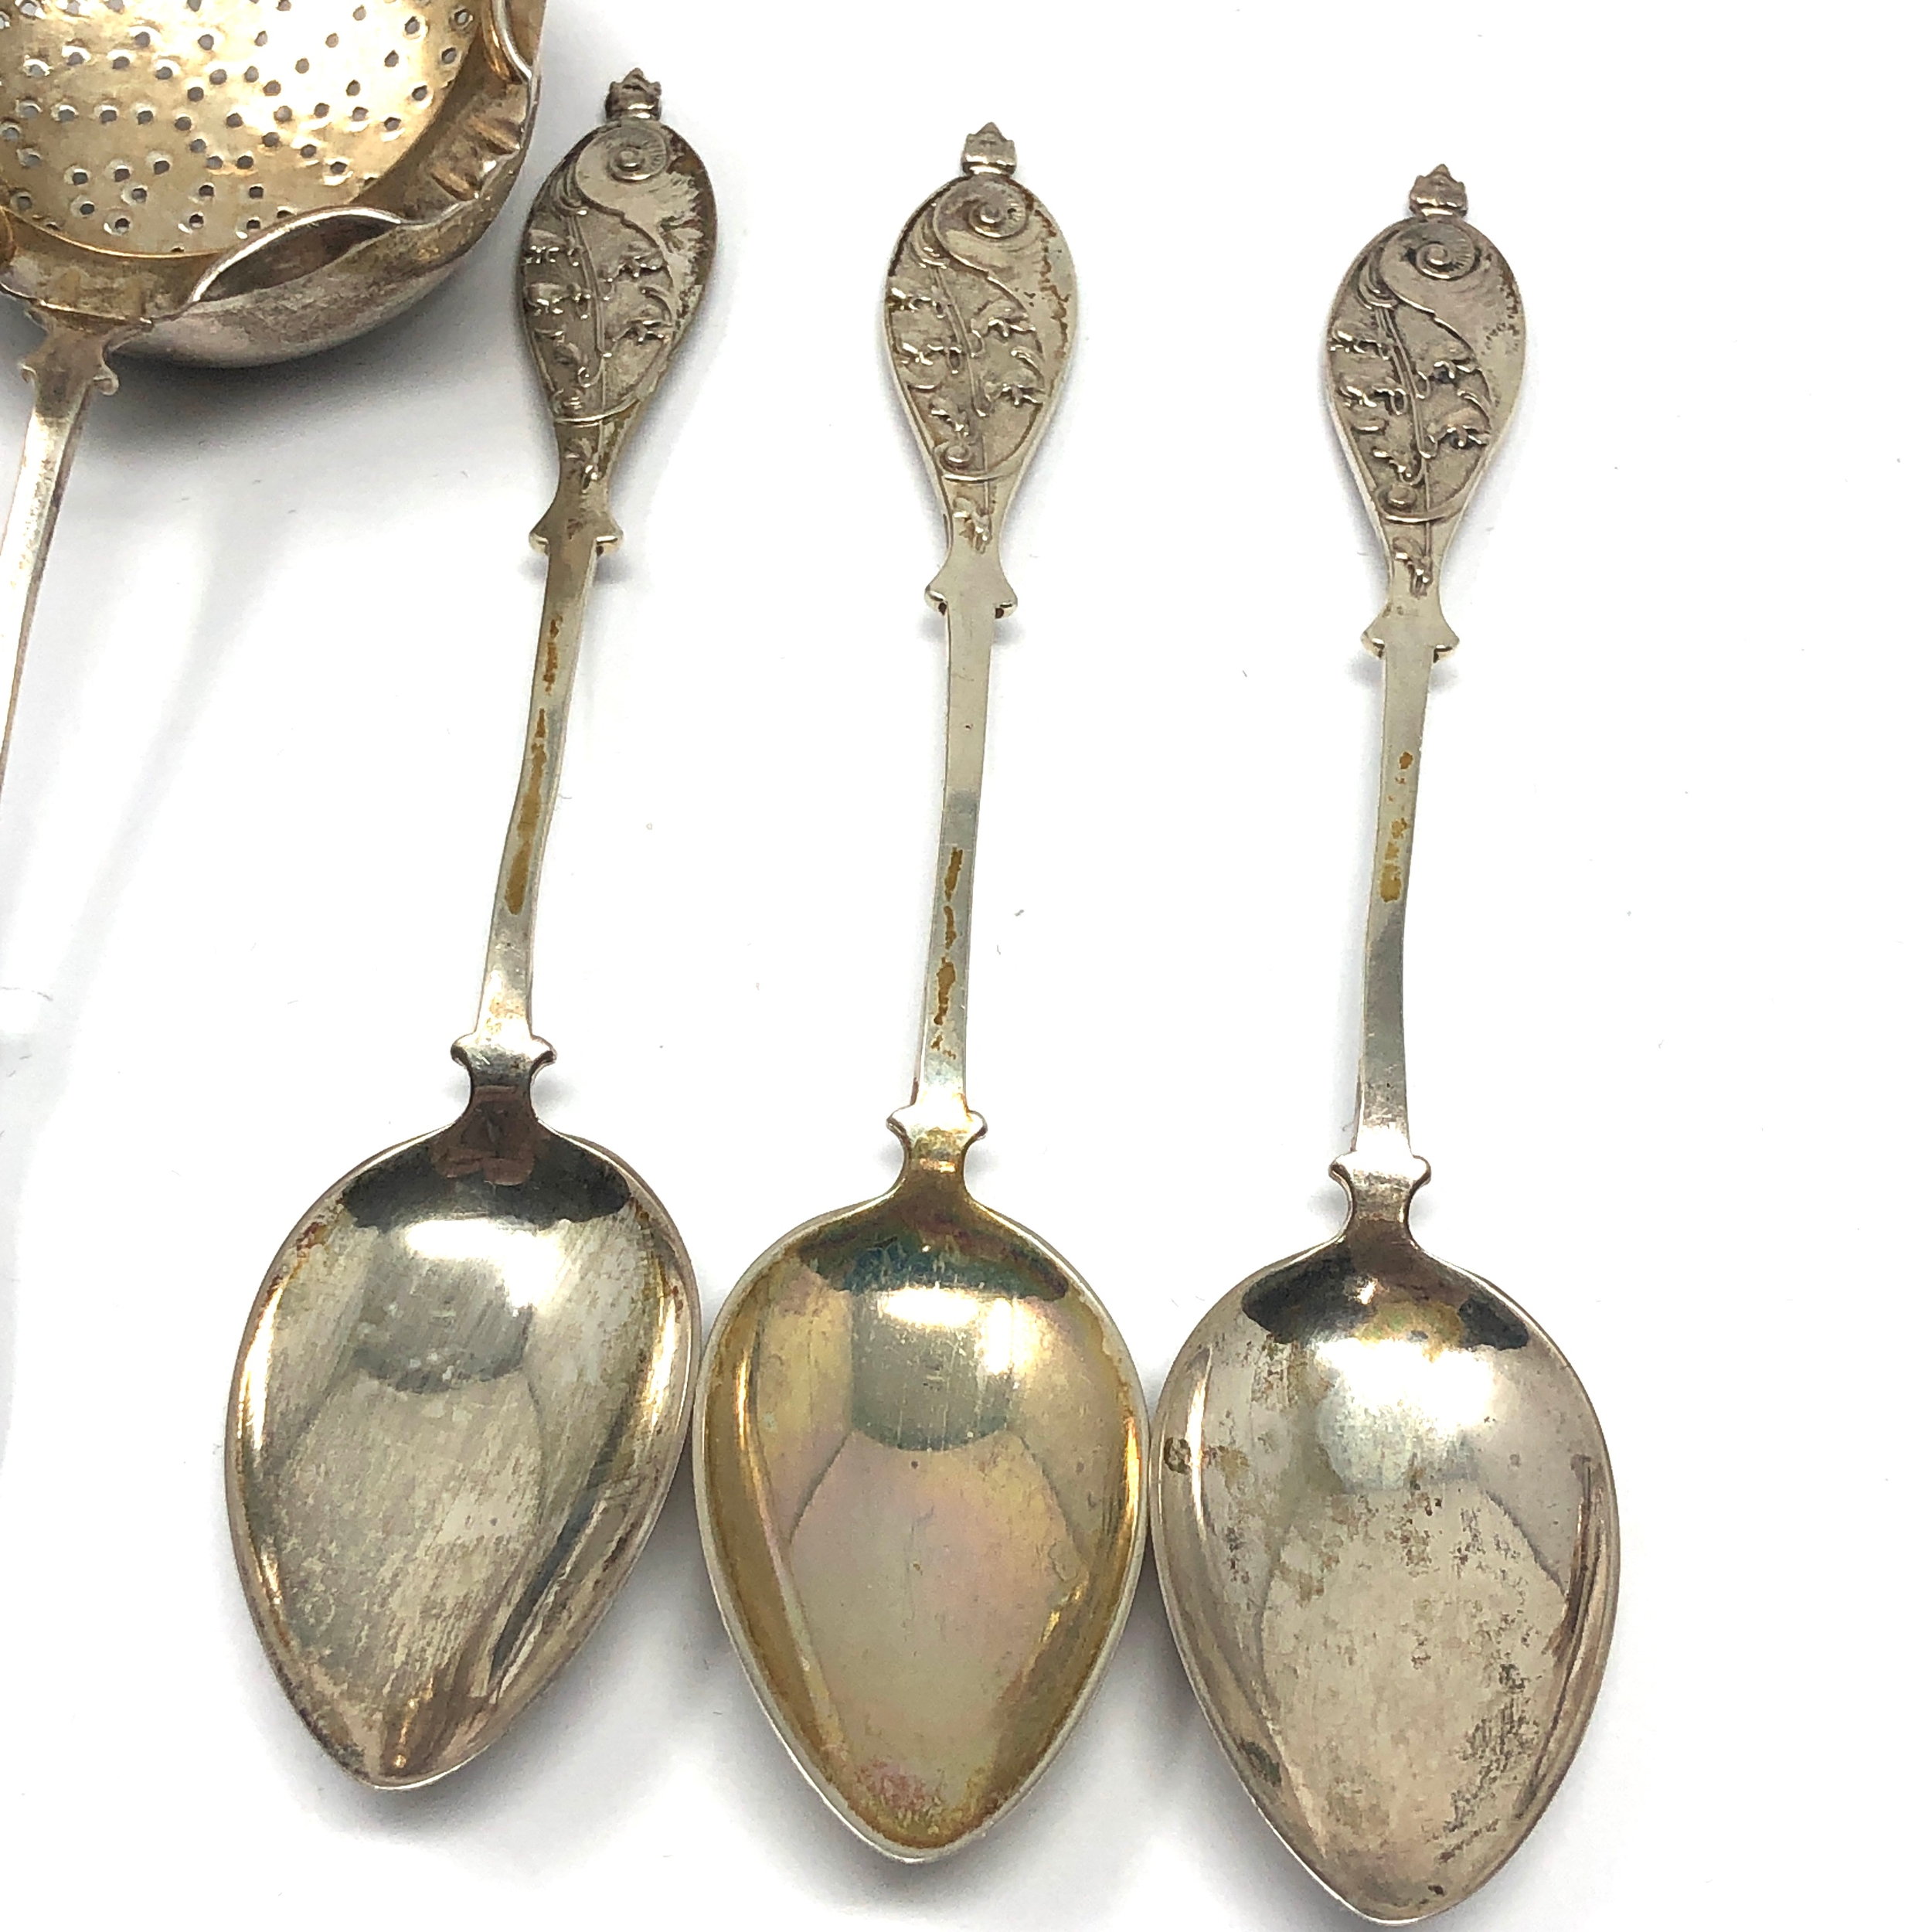 6 antique continental silver tea spoons & strainer - Image 2 of 4